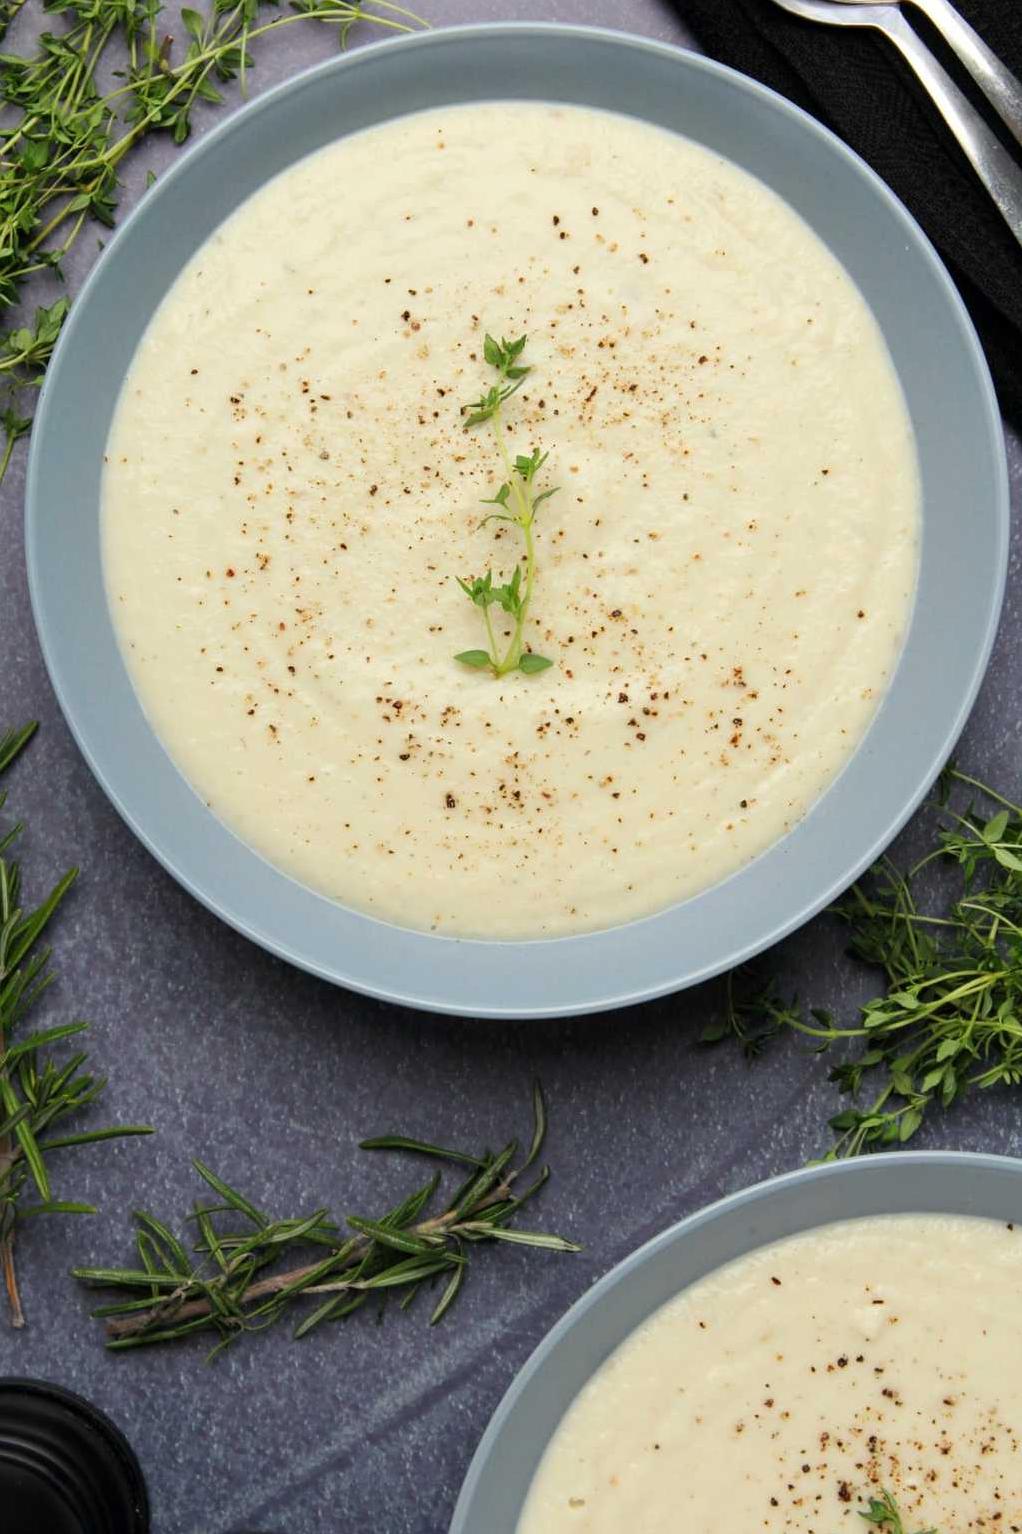  Deliciously smooth and velvety Cauliflower Soup that will satisfy your cravings in no time.